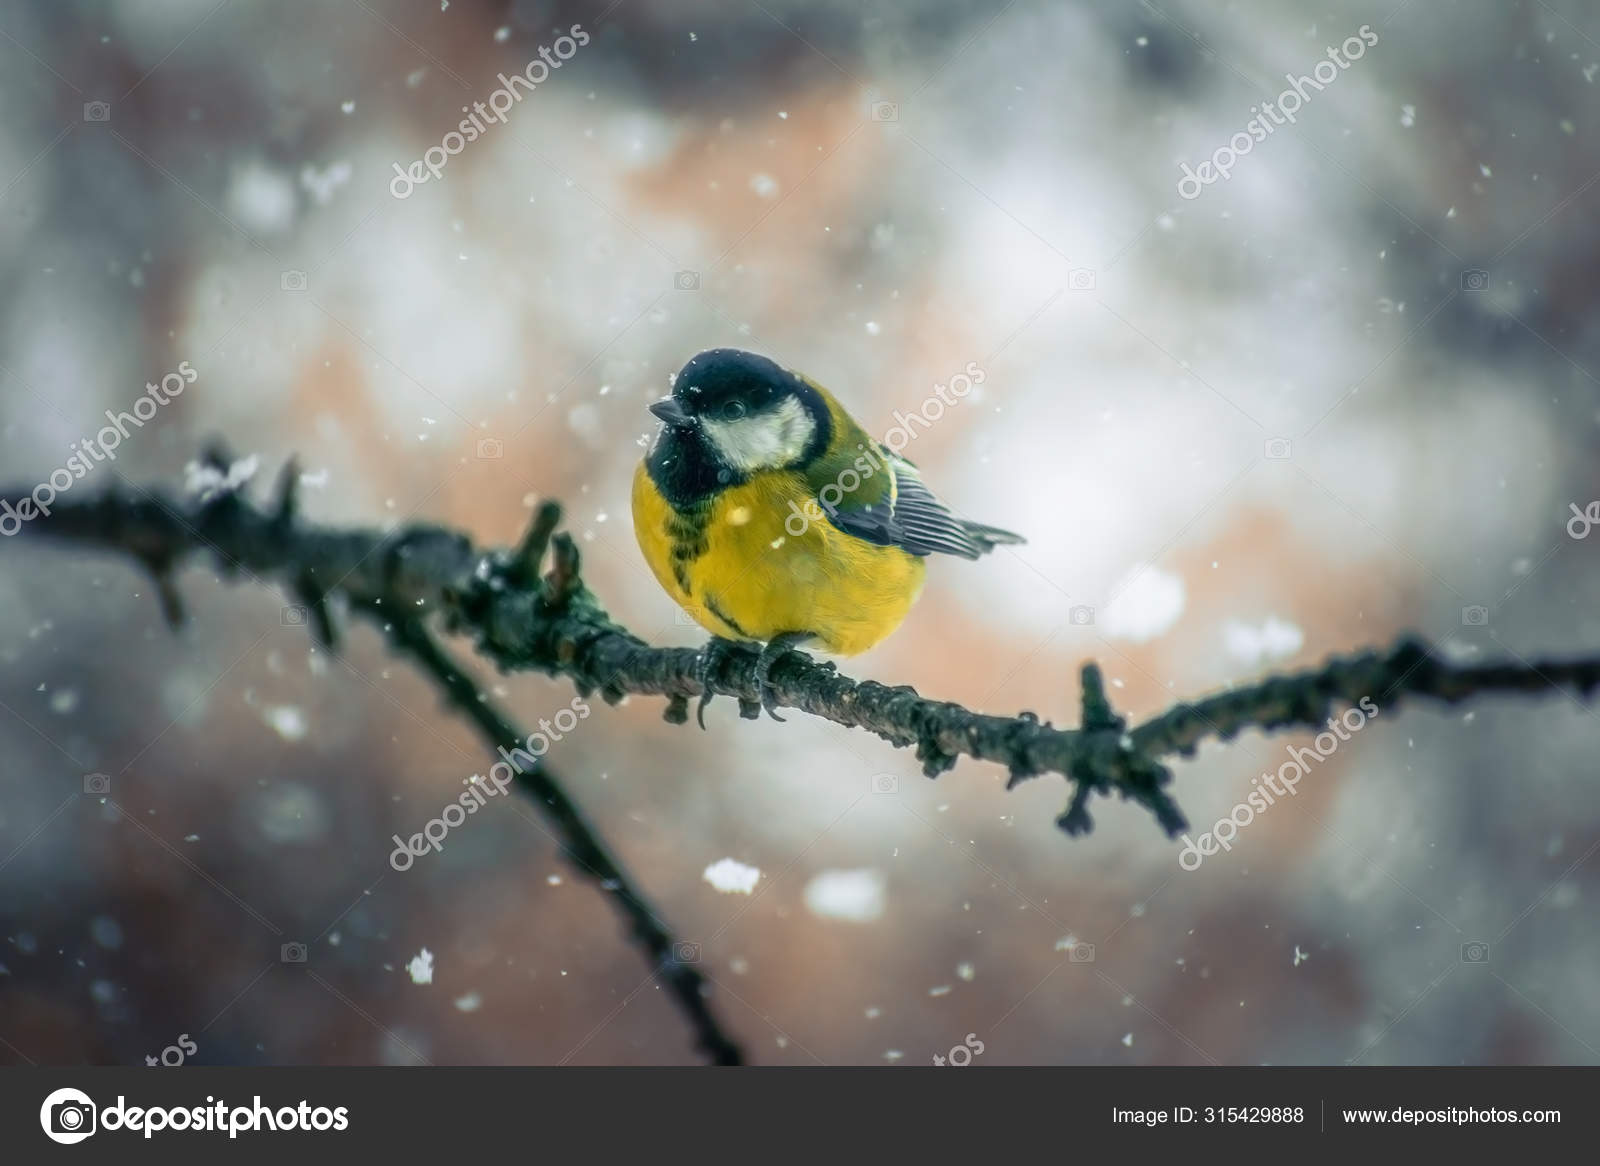 Bird with cold colors Stock Photos, Royalty Free Bird with cold colors